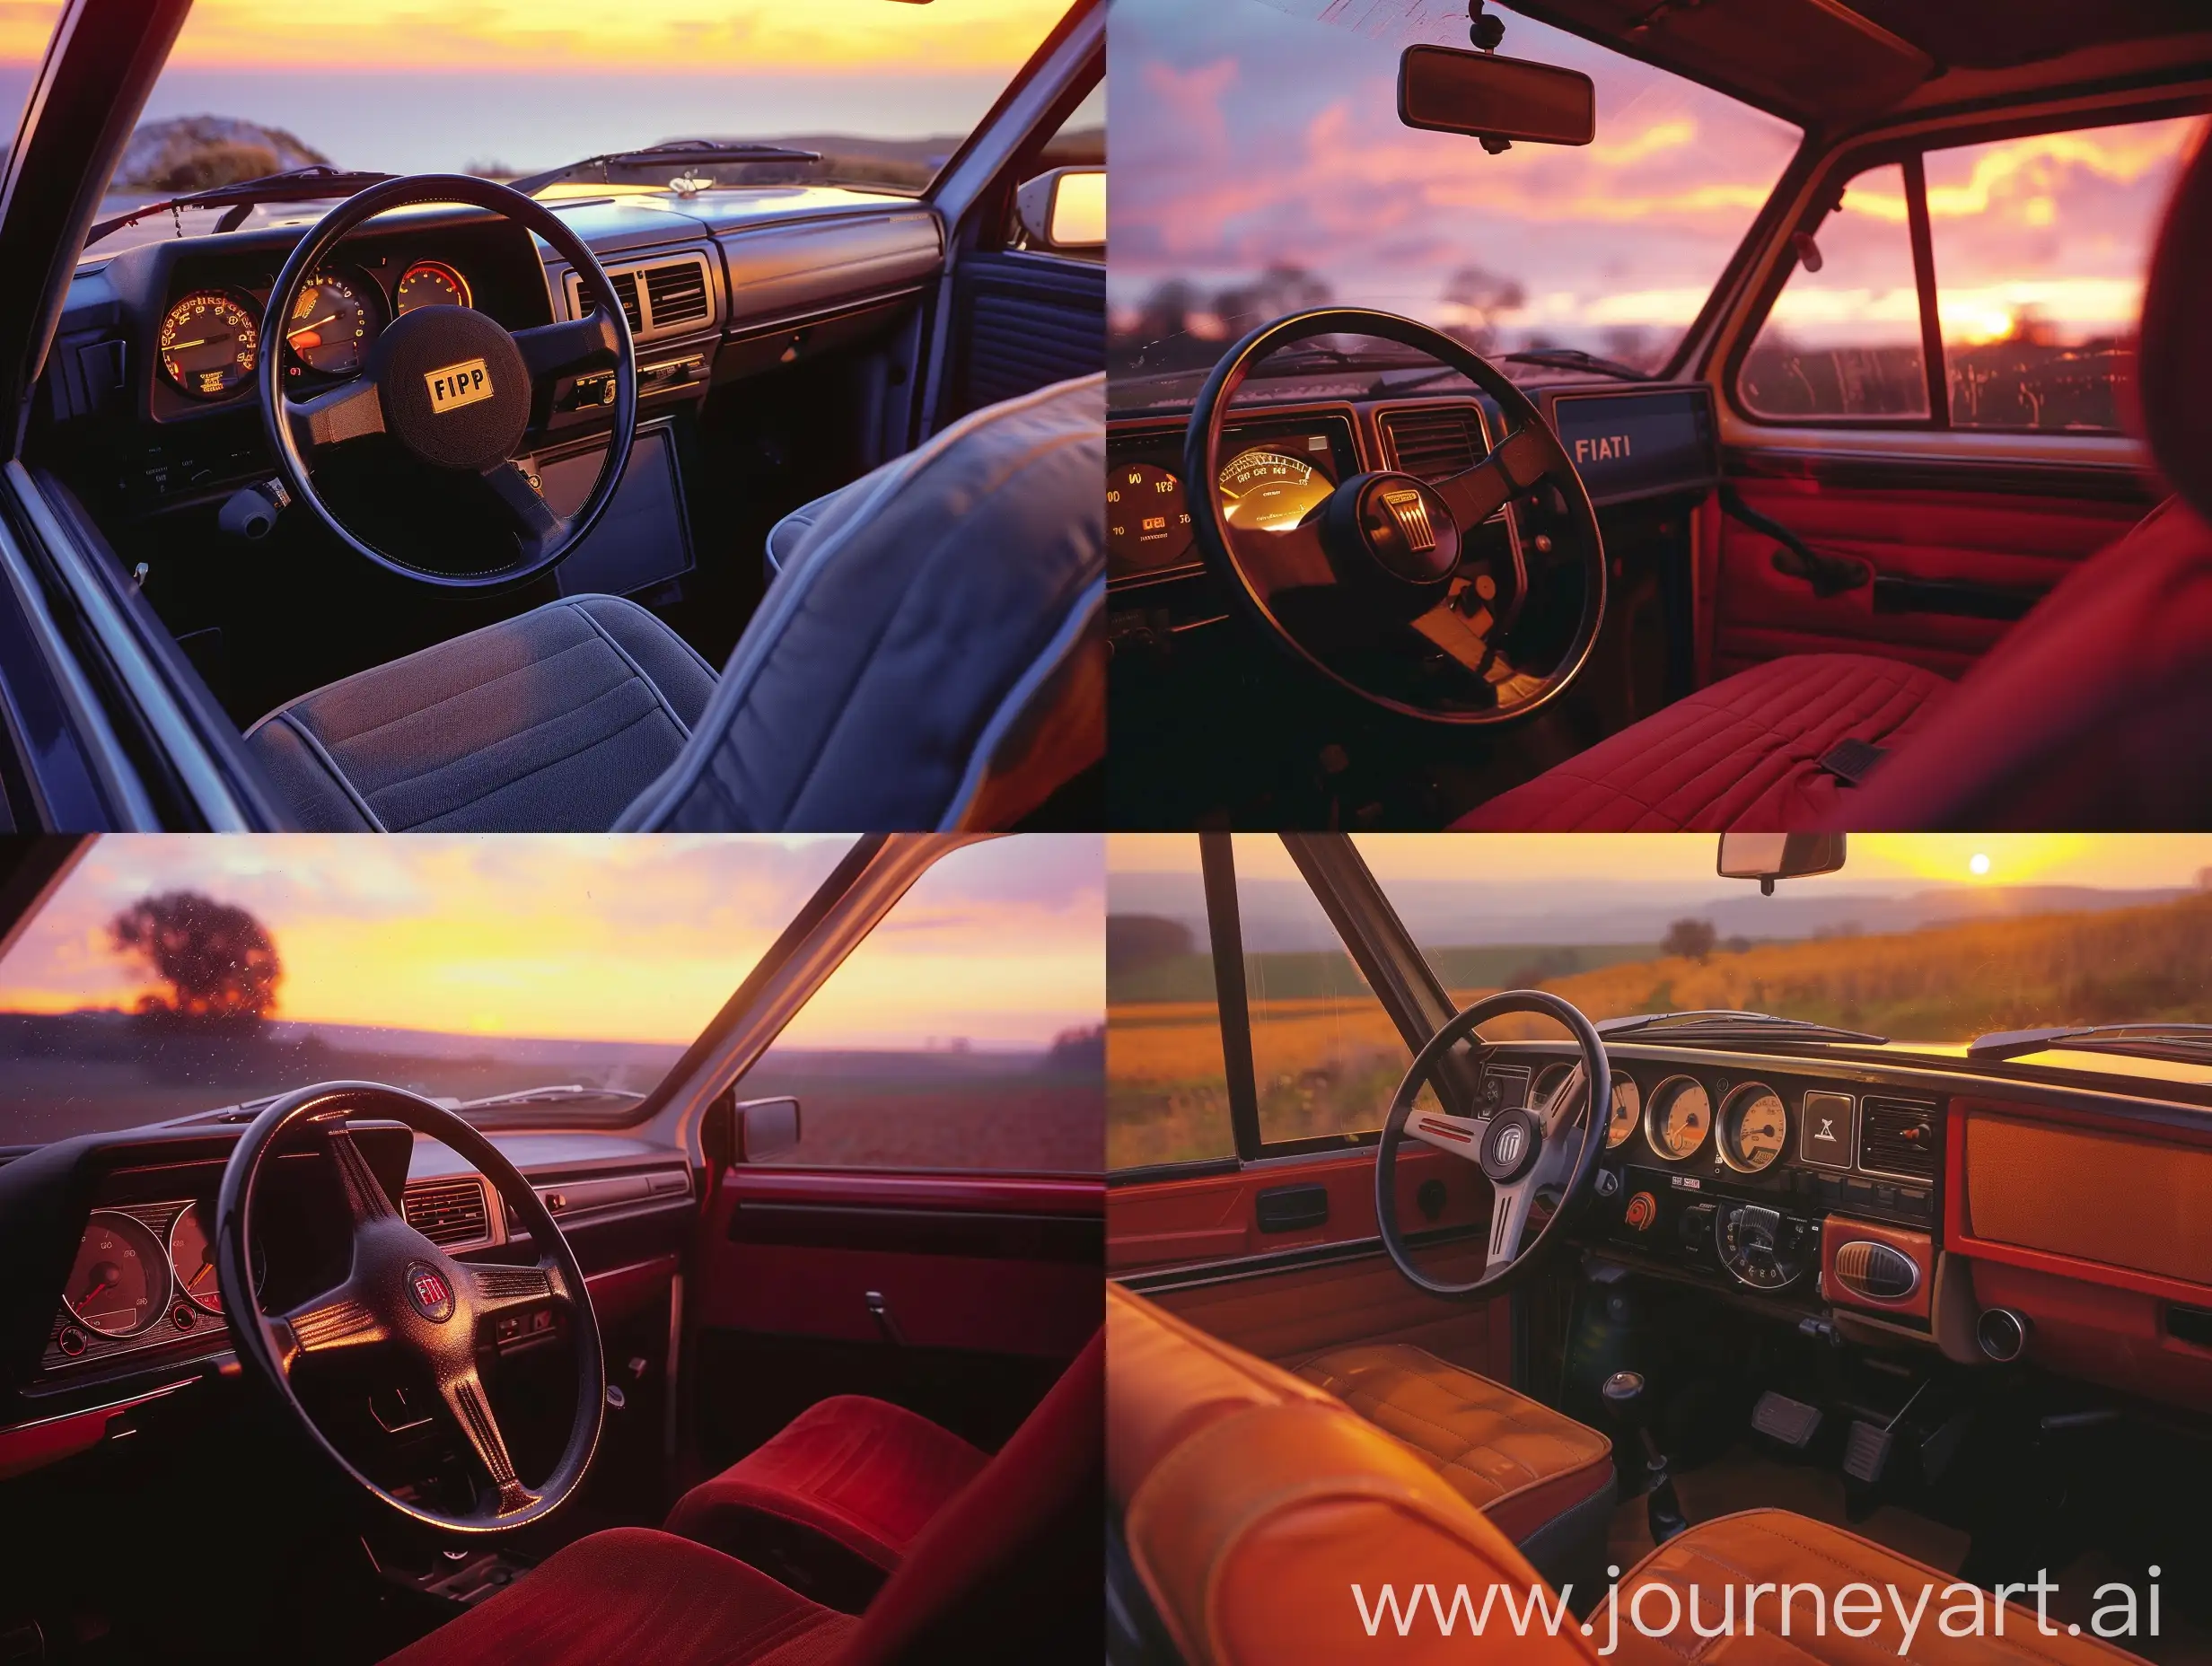 Fiat-126p-Car-Dashboard-Close-Up-at-Sunset-with-Seats